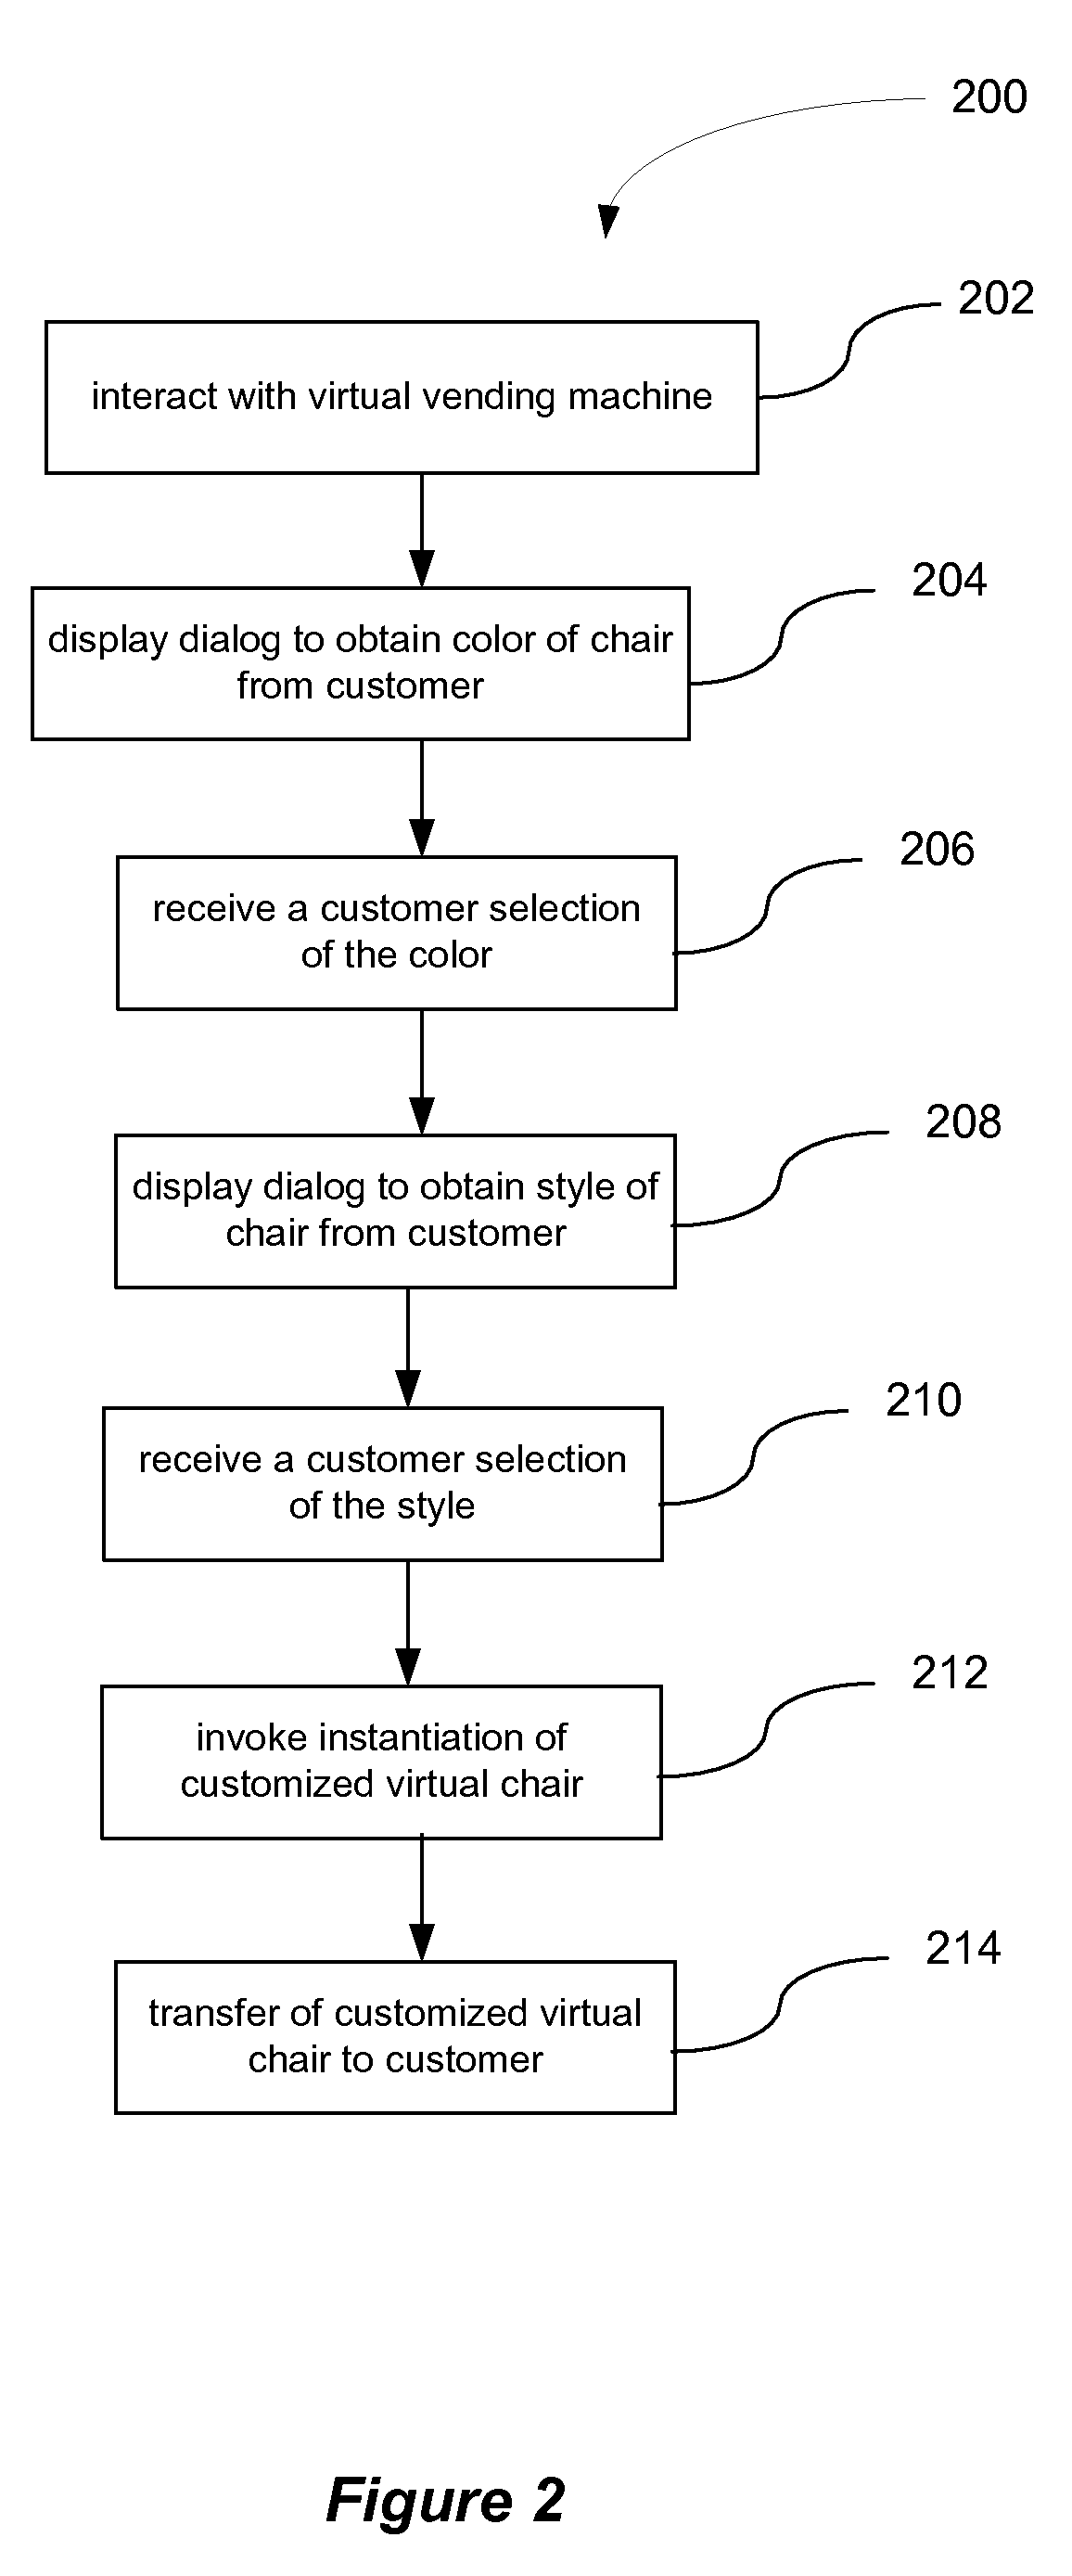 Method and system for self-service manufacture and sale of customized virtual goods